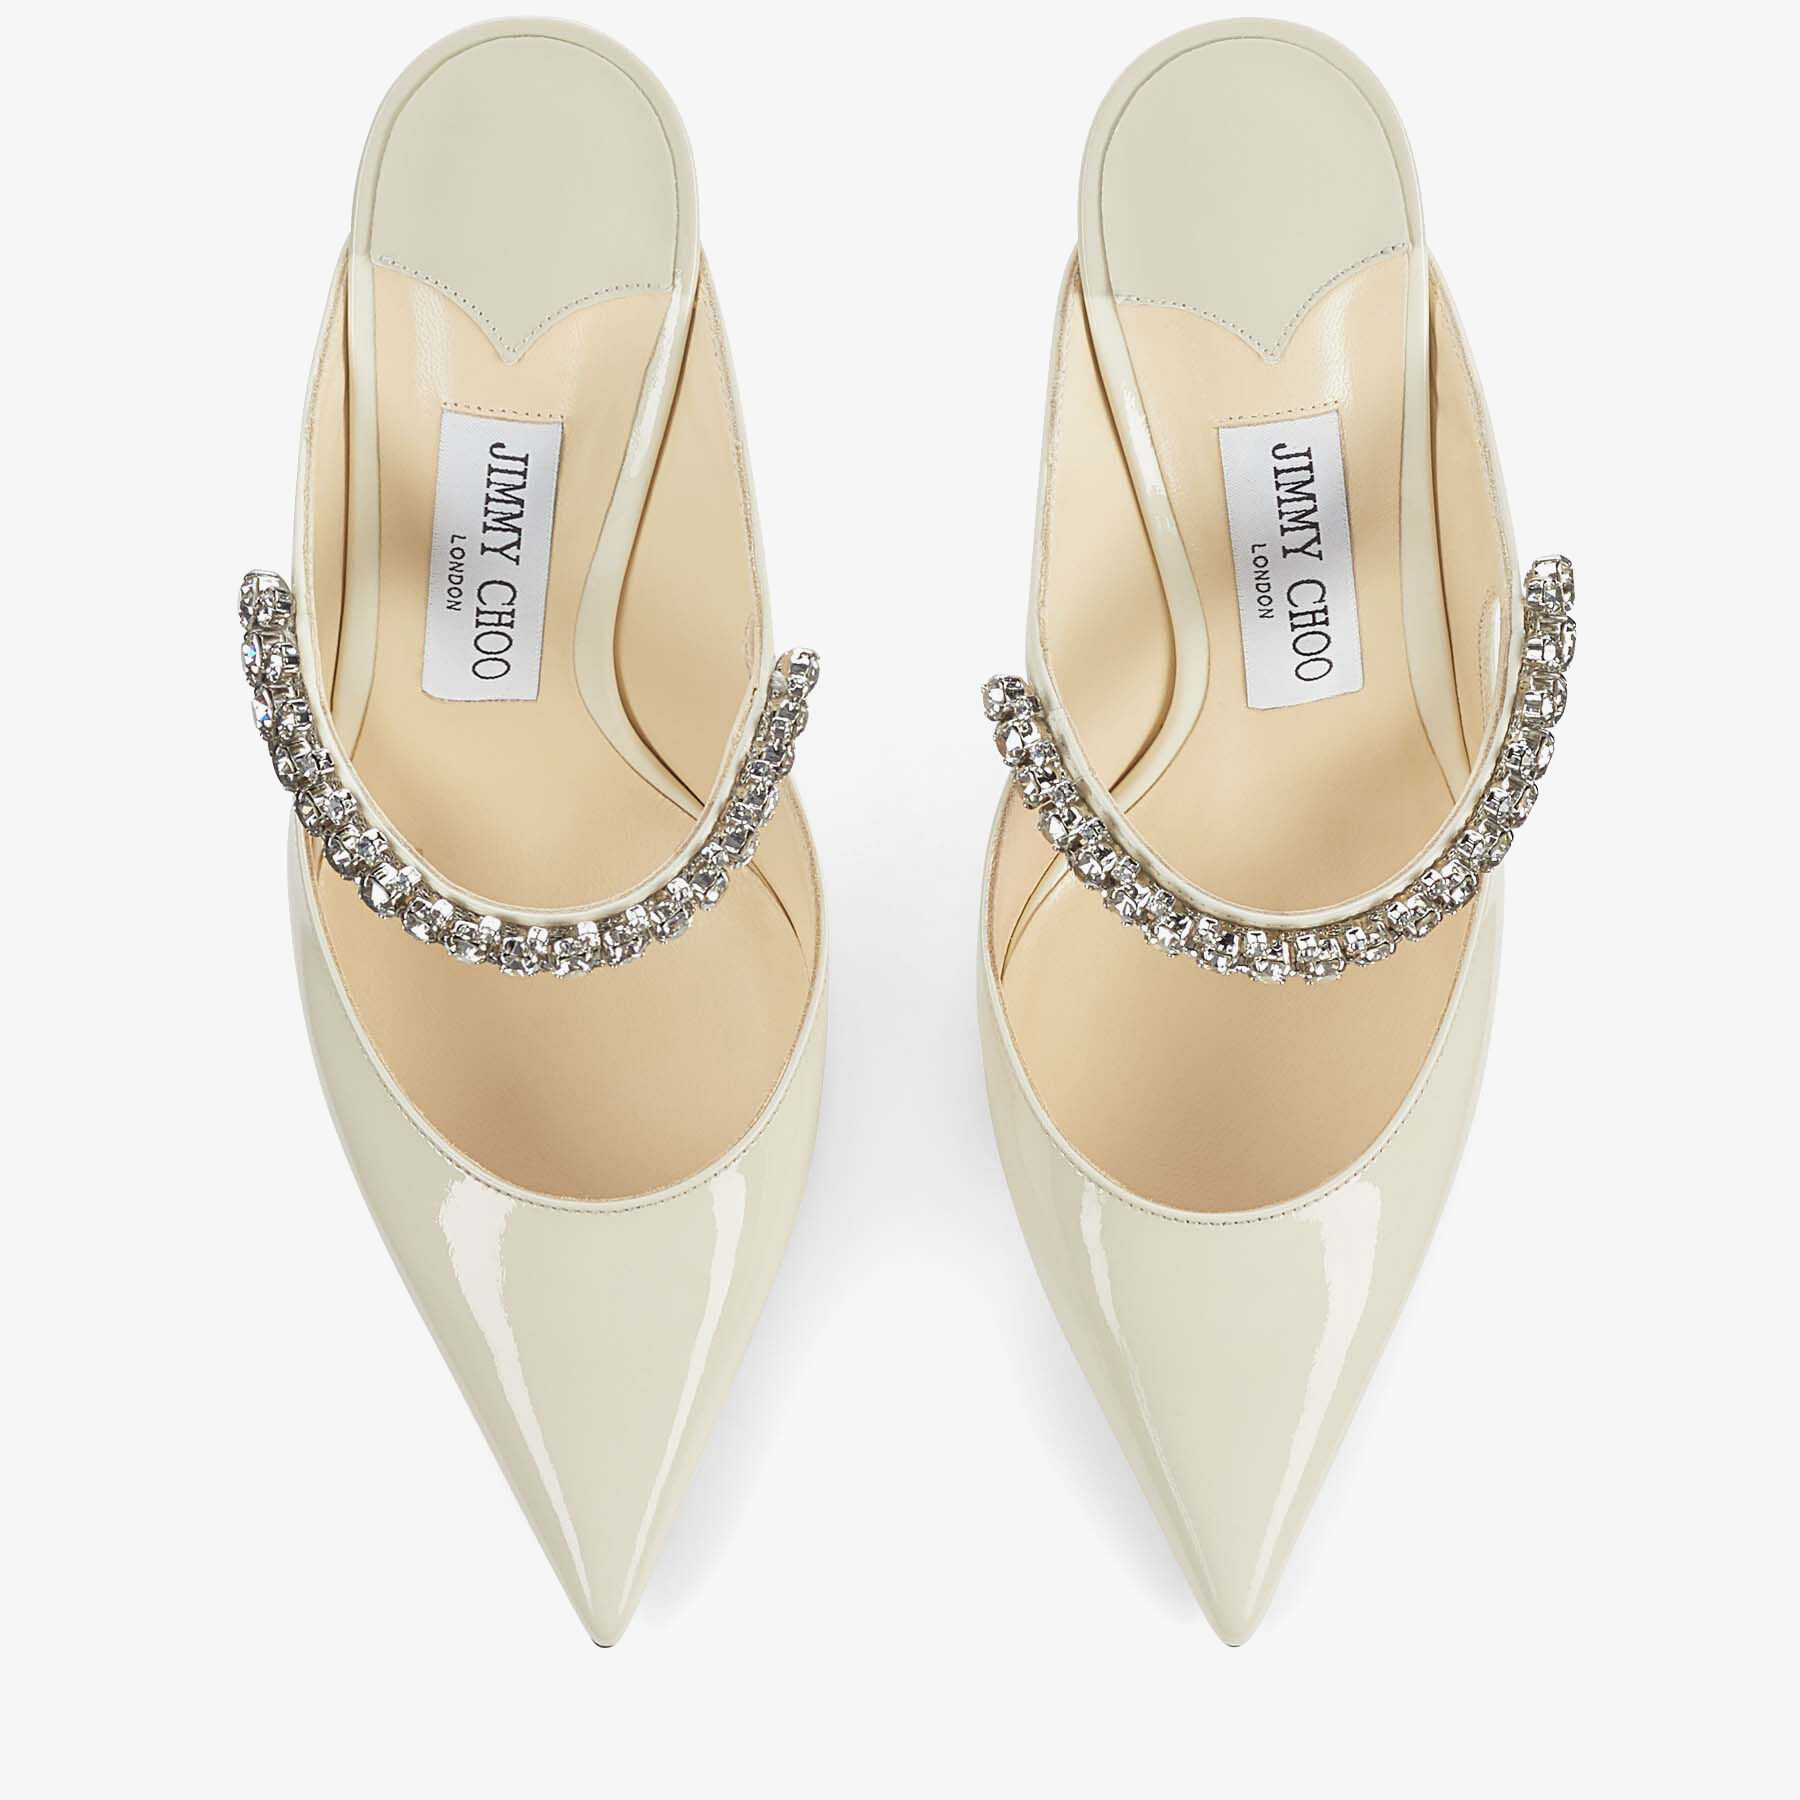 Linen Patent Leather Mules with Crystal Strap, BING 100